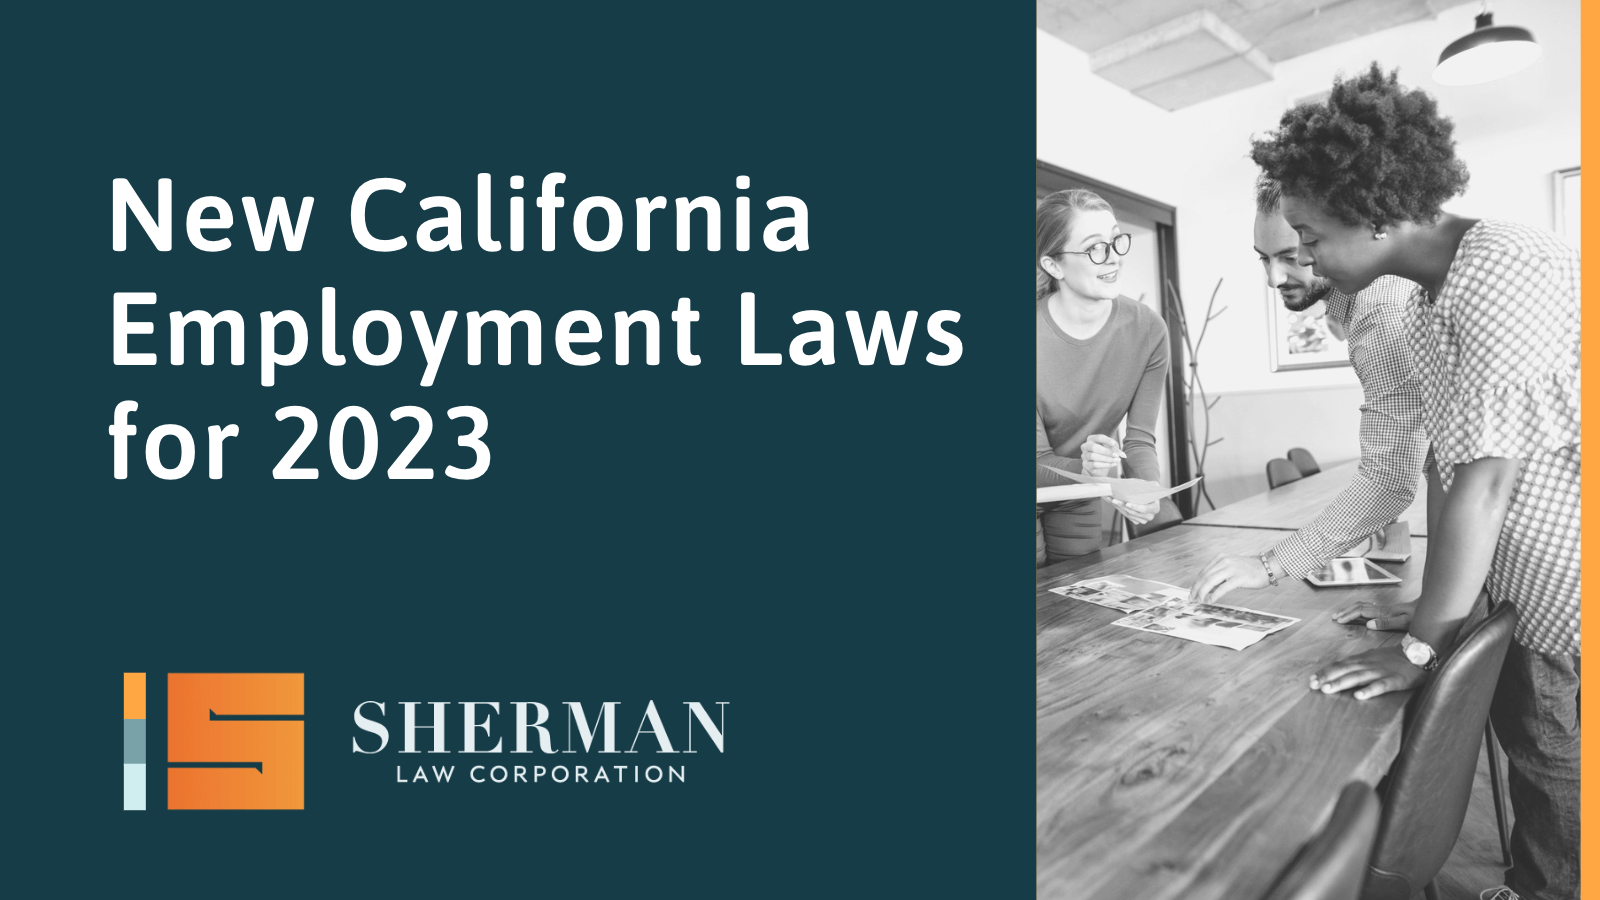 New California Employment Laws for 2023 - callifornia employment law - sherman law corporation